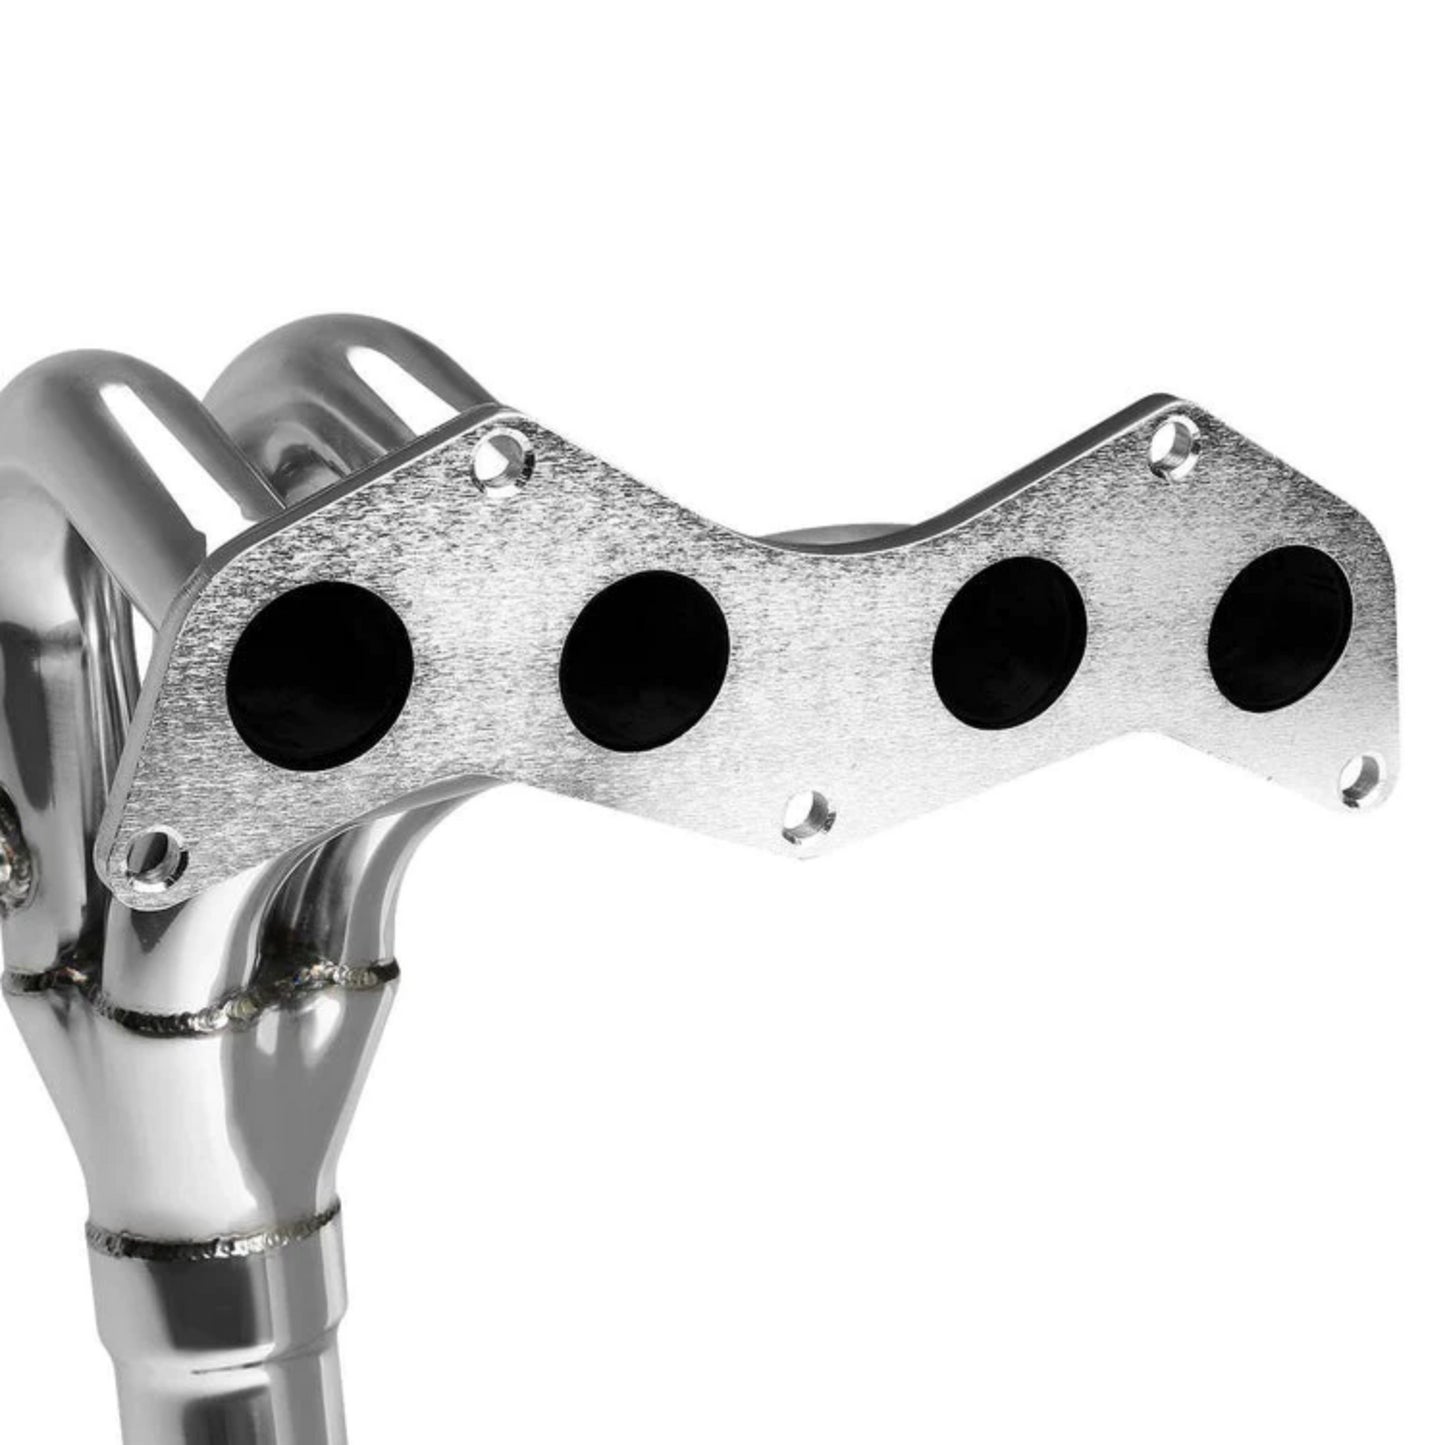 4-1 Stainless Steel Exhaust Header Manifold For 05-10 Scion TC 2.4L DOHC